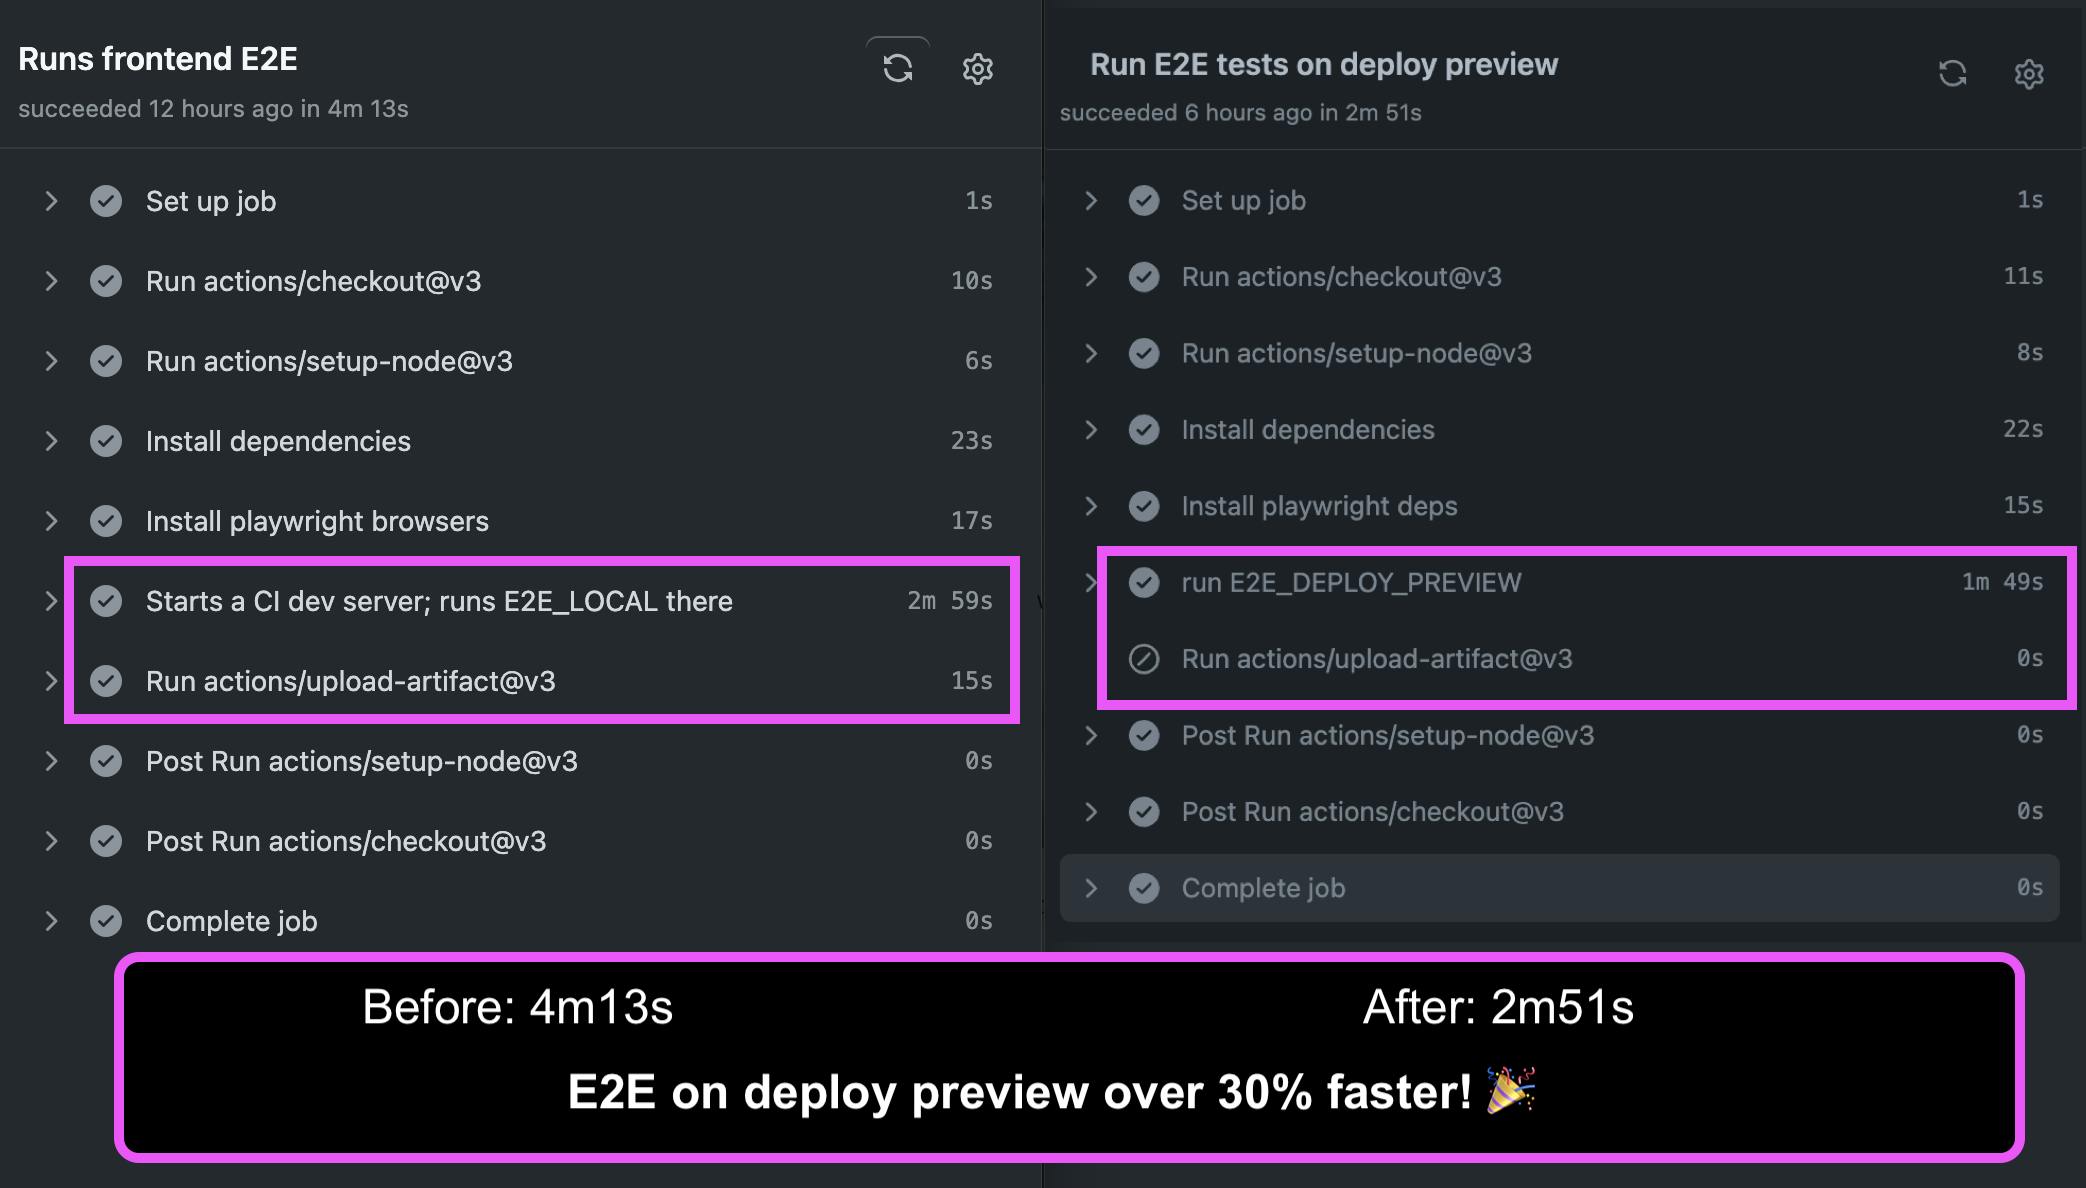 screenshots of before and after github action reports, showing over 30% speed improvement of E2E runs on deploy preview